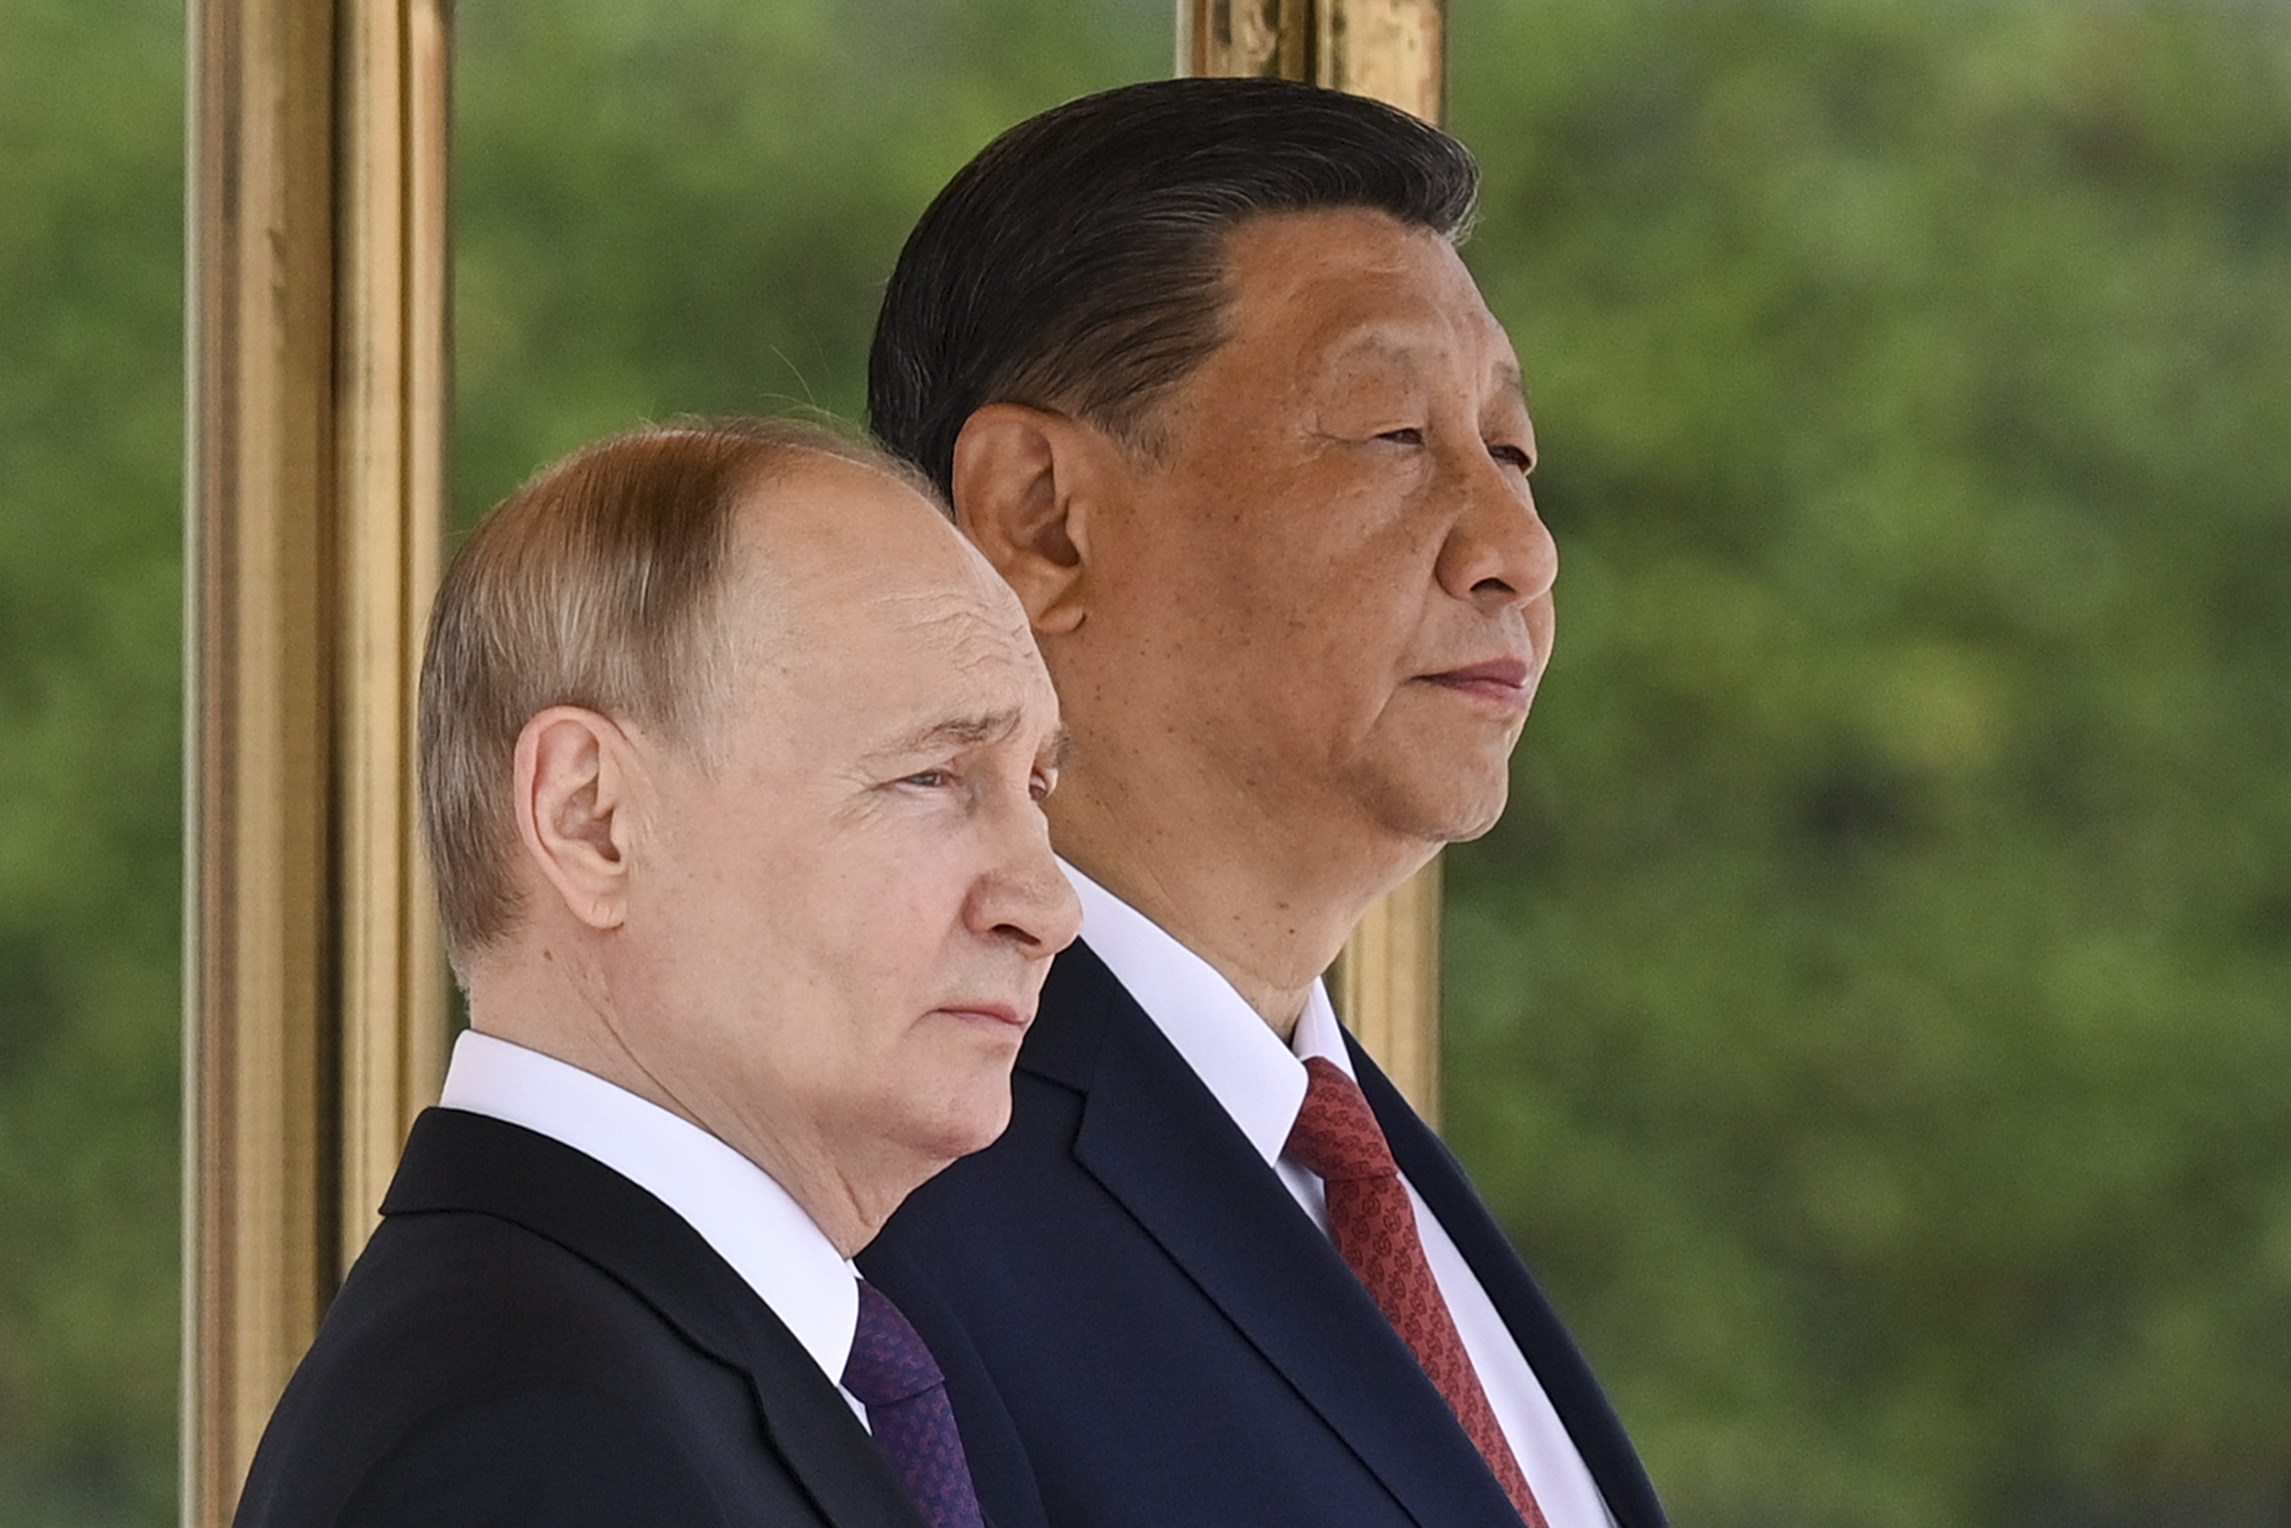 Last week, when Chinese President Xi Jinping, right, met Russian President Vladimir Putin in China, their countries issued a statement about “deepening the comprehensive strategic partnership of coordination for the new era”. Photo: Sputnik via AP